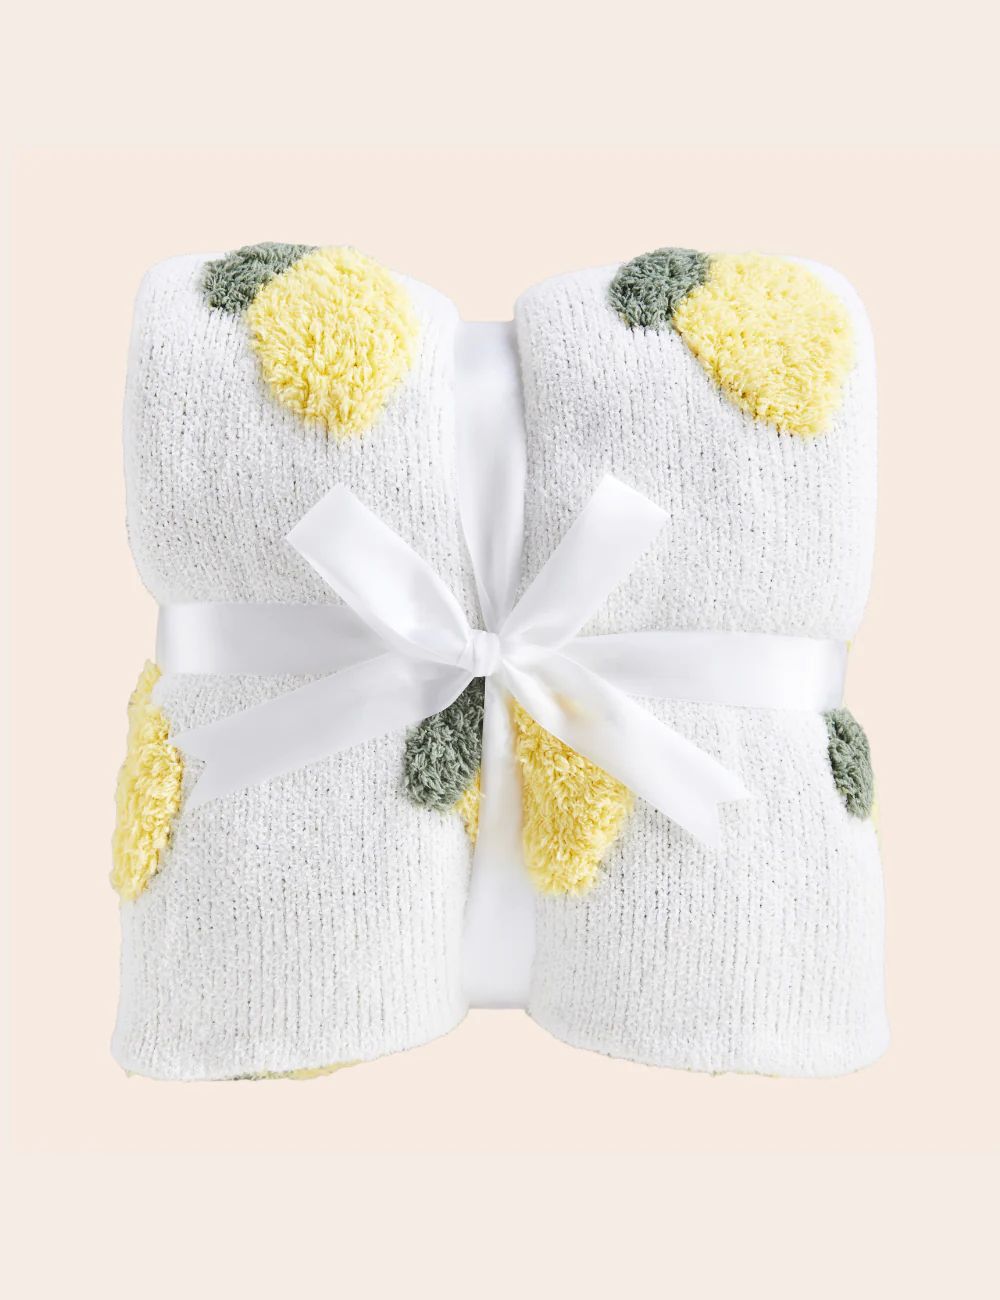 Lemons Buttery Blanket- Receiving Pre Order Feb 15th | The Styled Collection